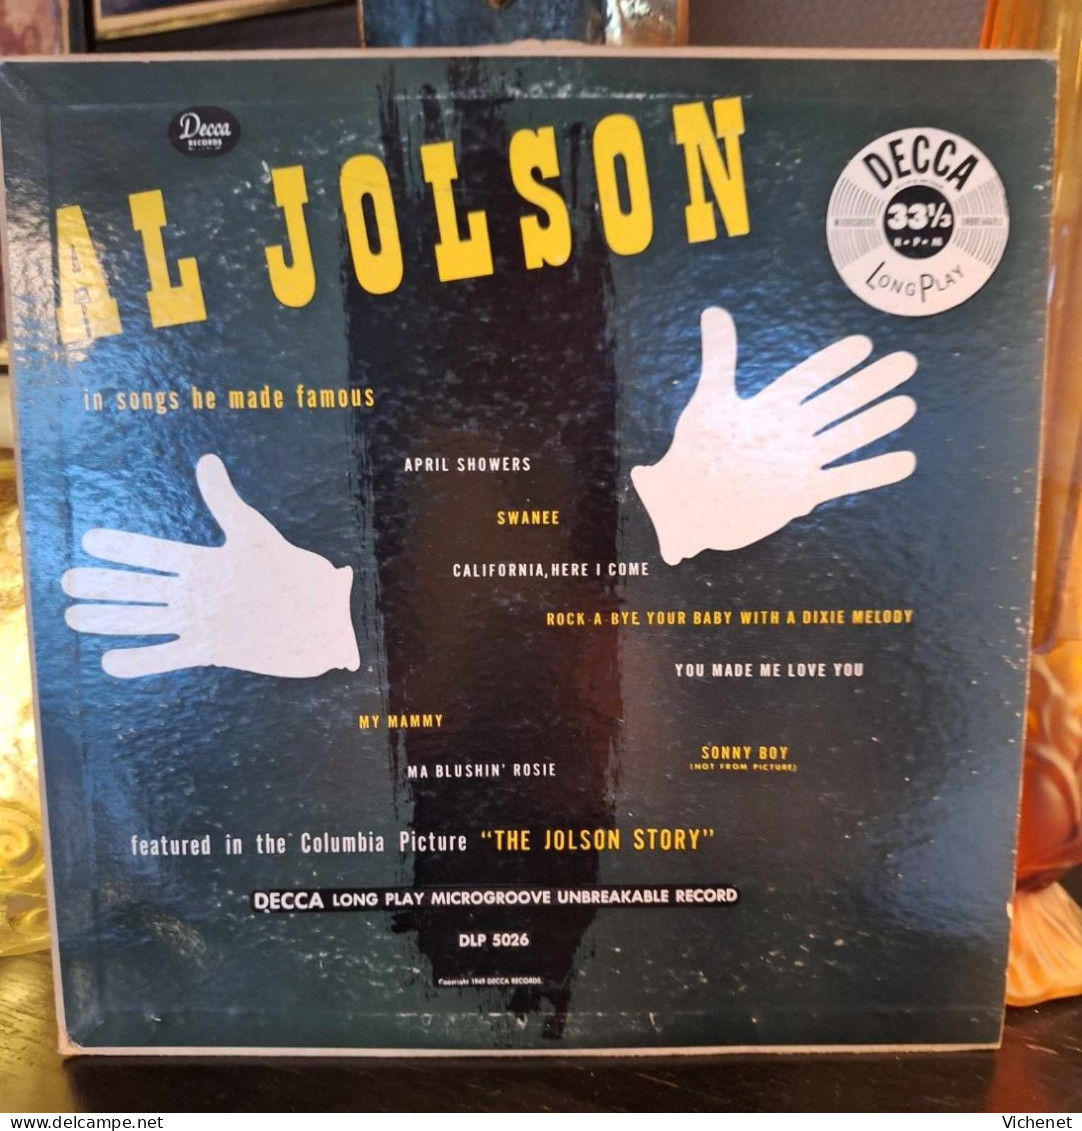 Al Jolson - In Songs He Made Famous - 25 Cm - Formati Speciali